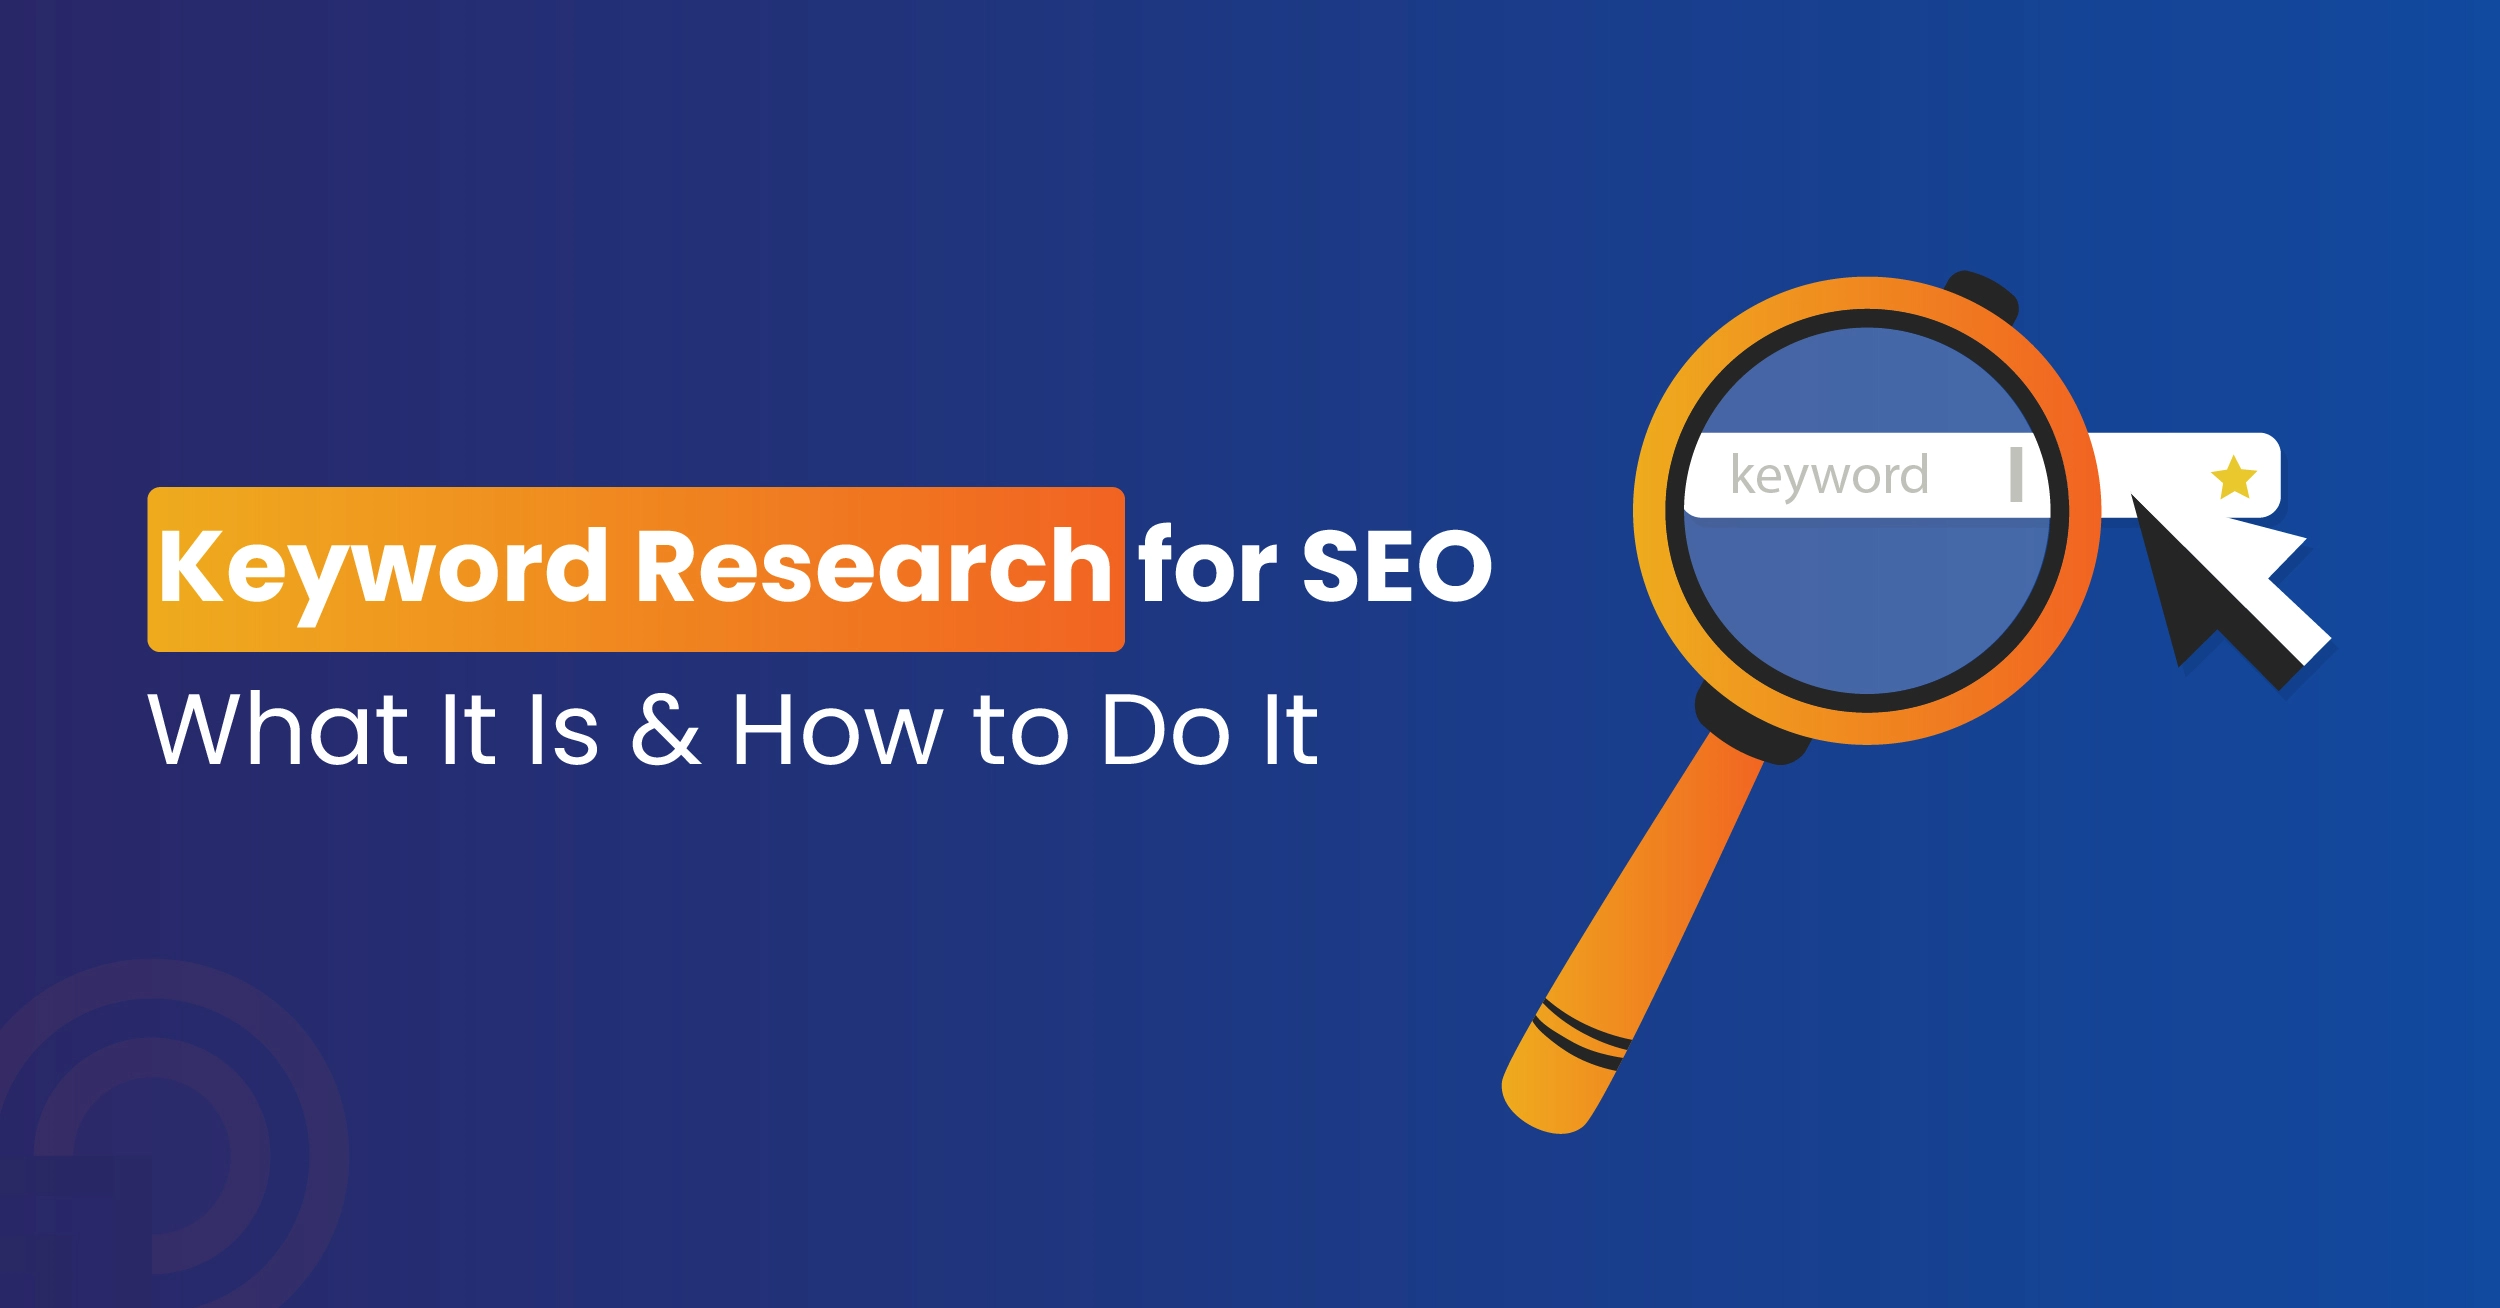 Keyword Research for SEO: What It Is & How to Do It